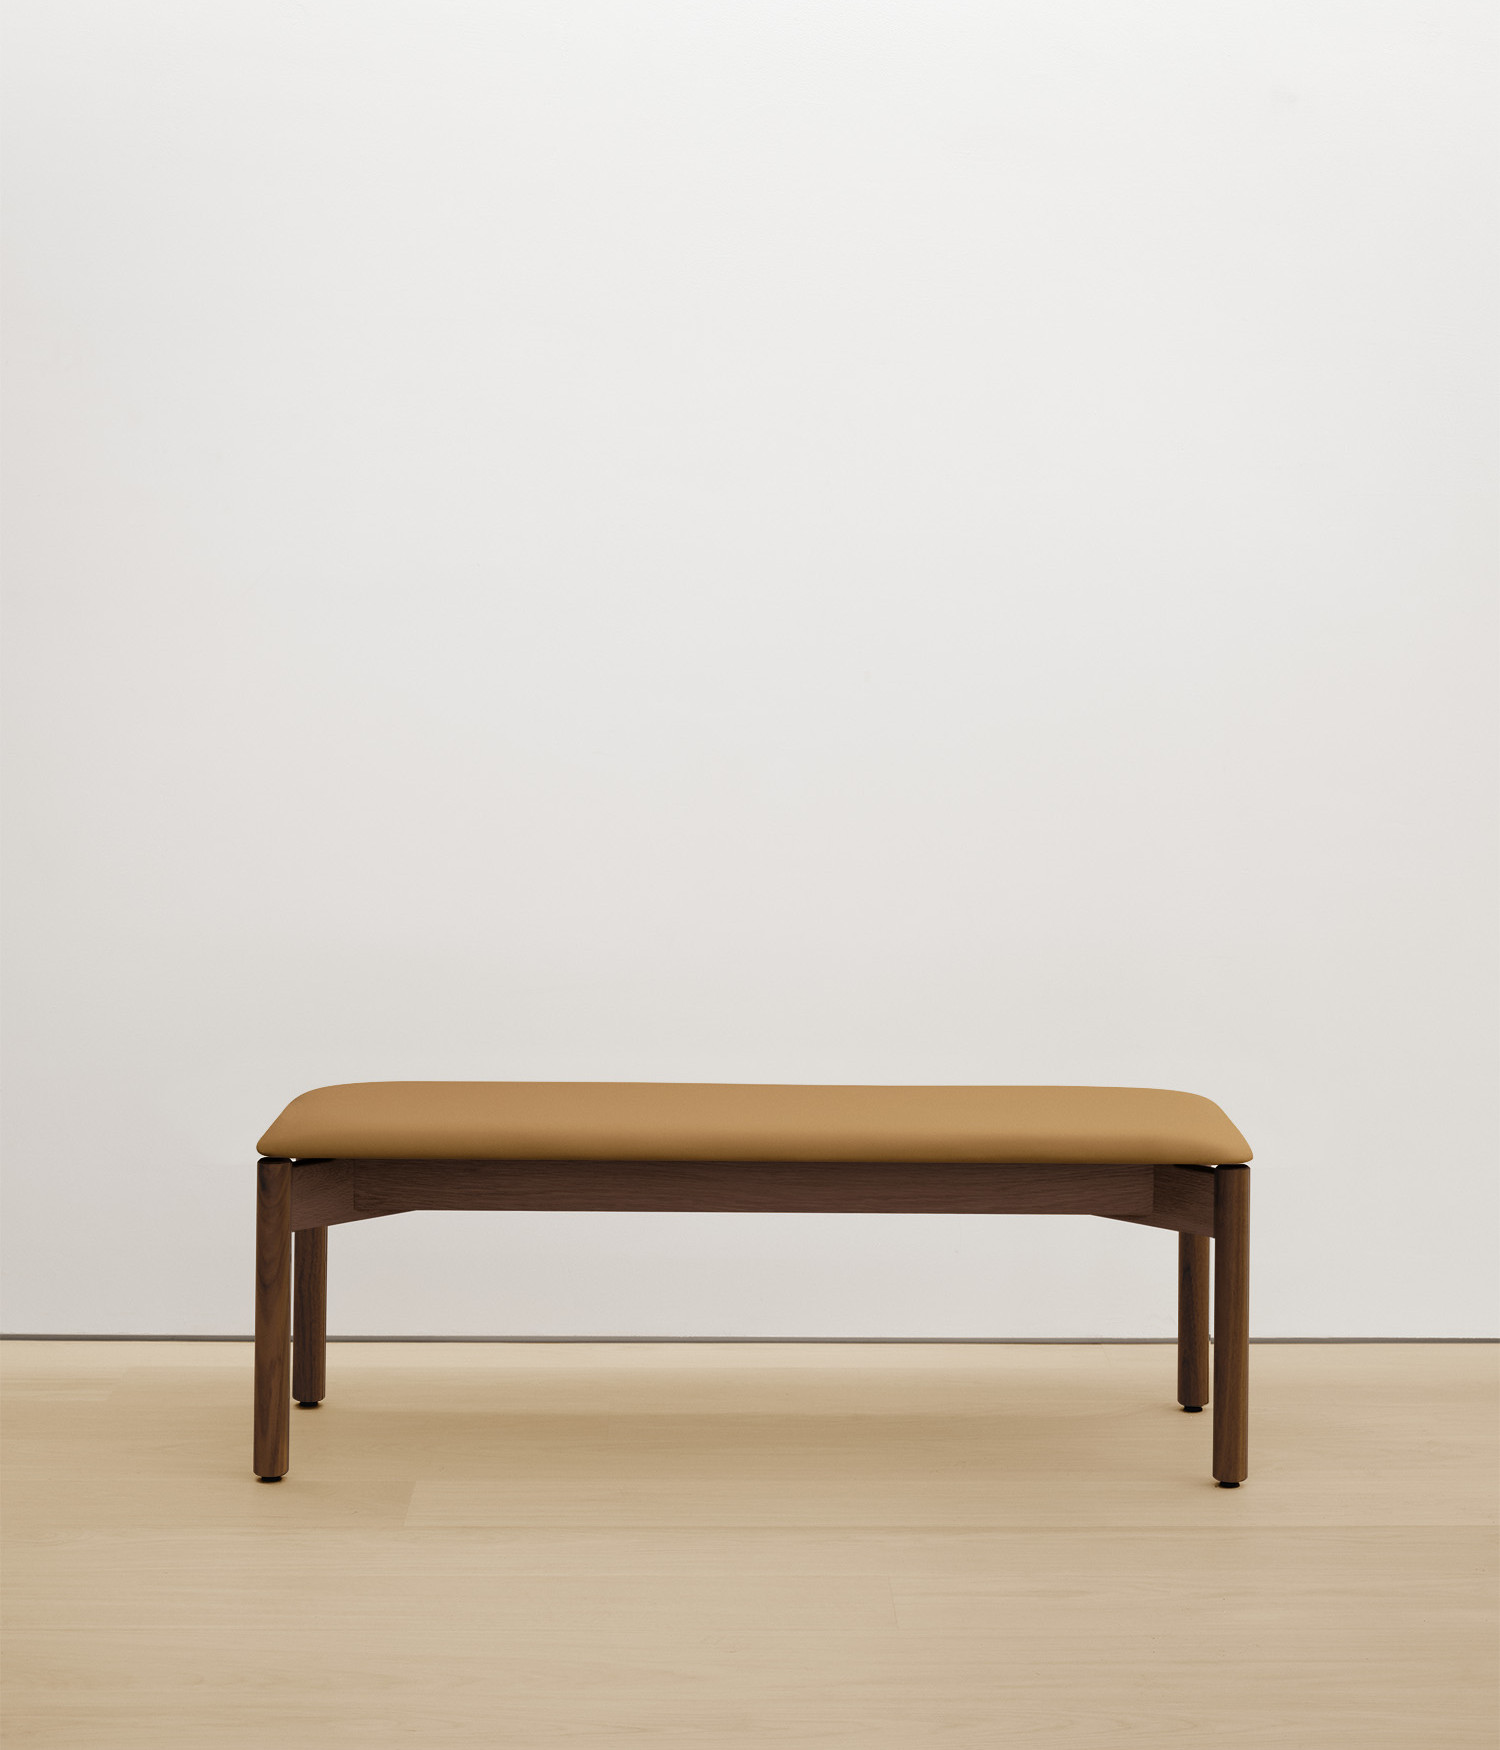 walnut bench with tan upholstered seat